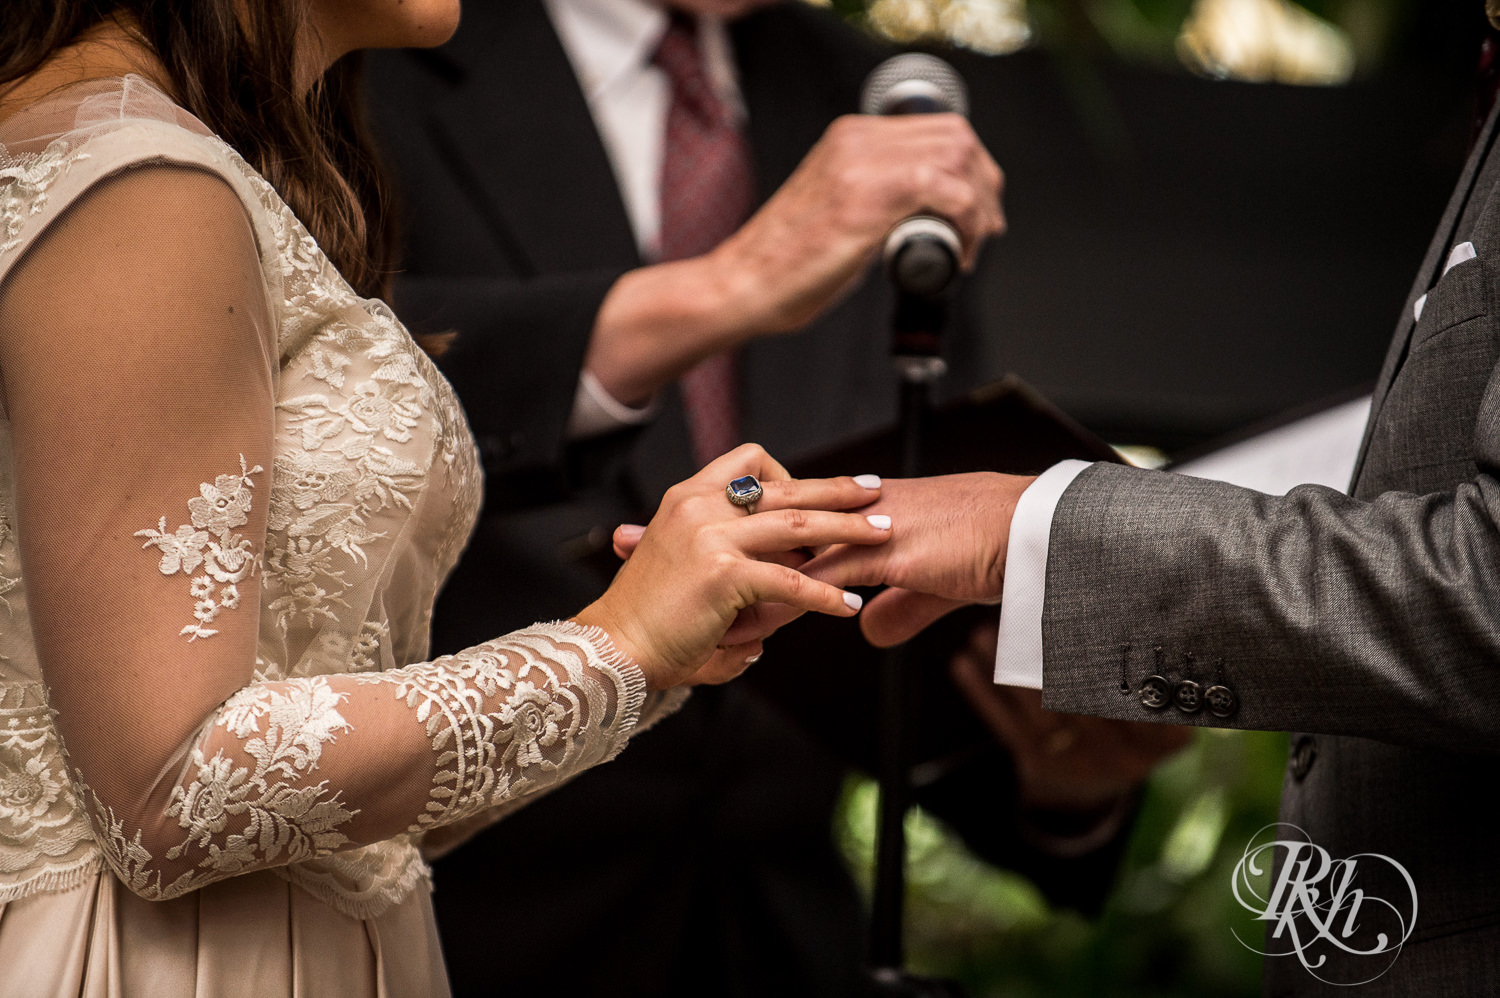 Bride and and groom exchange rings during wedding ceremony at Paikka in Saint Paul, Minnesota.